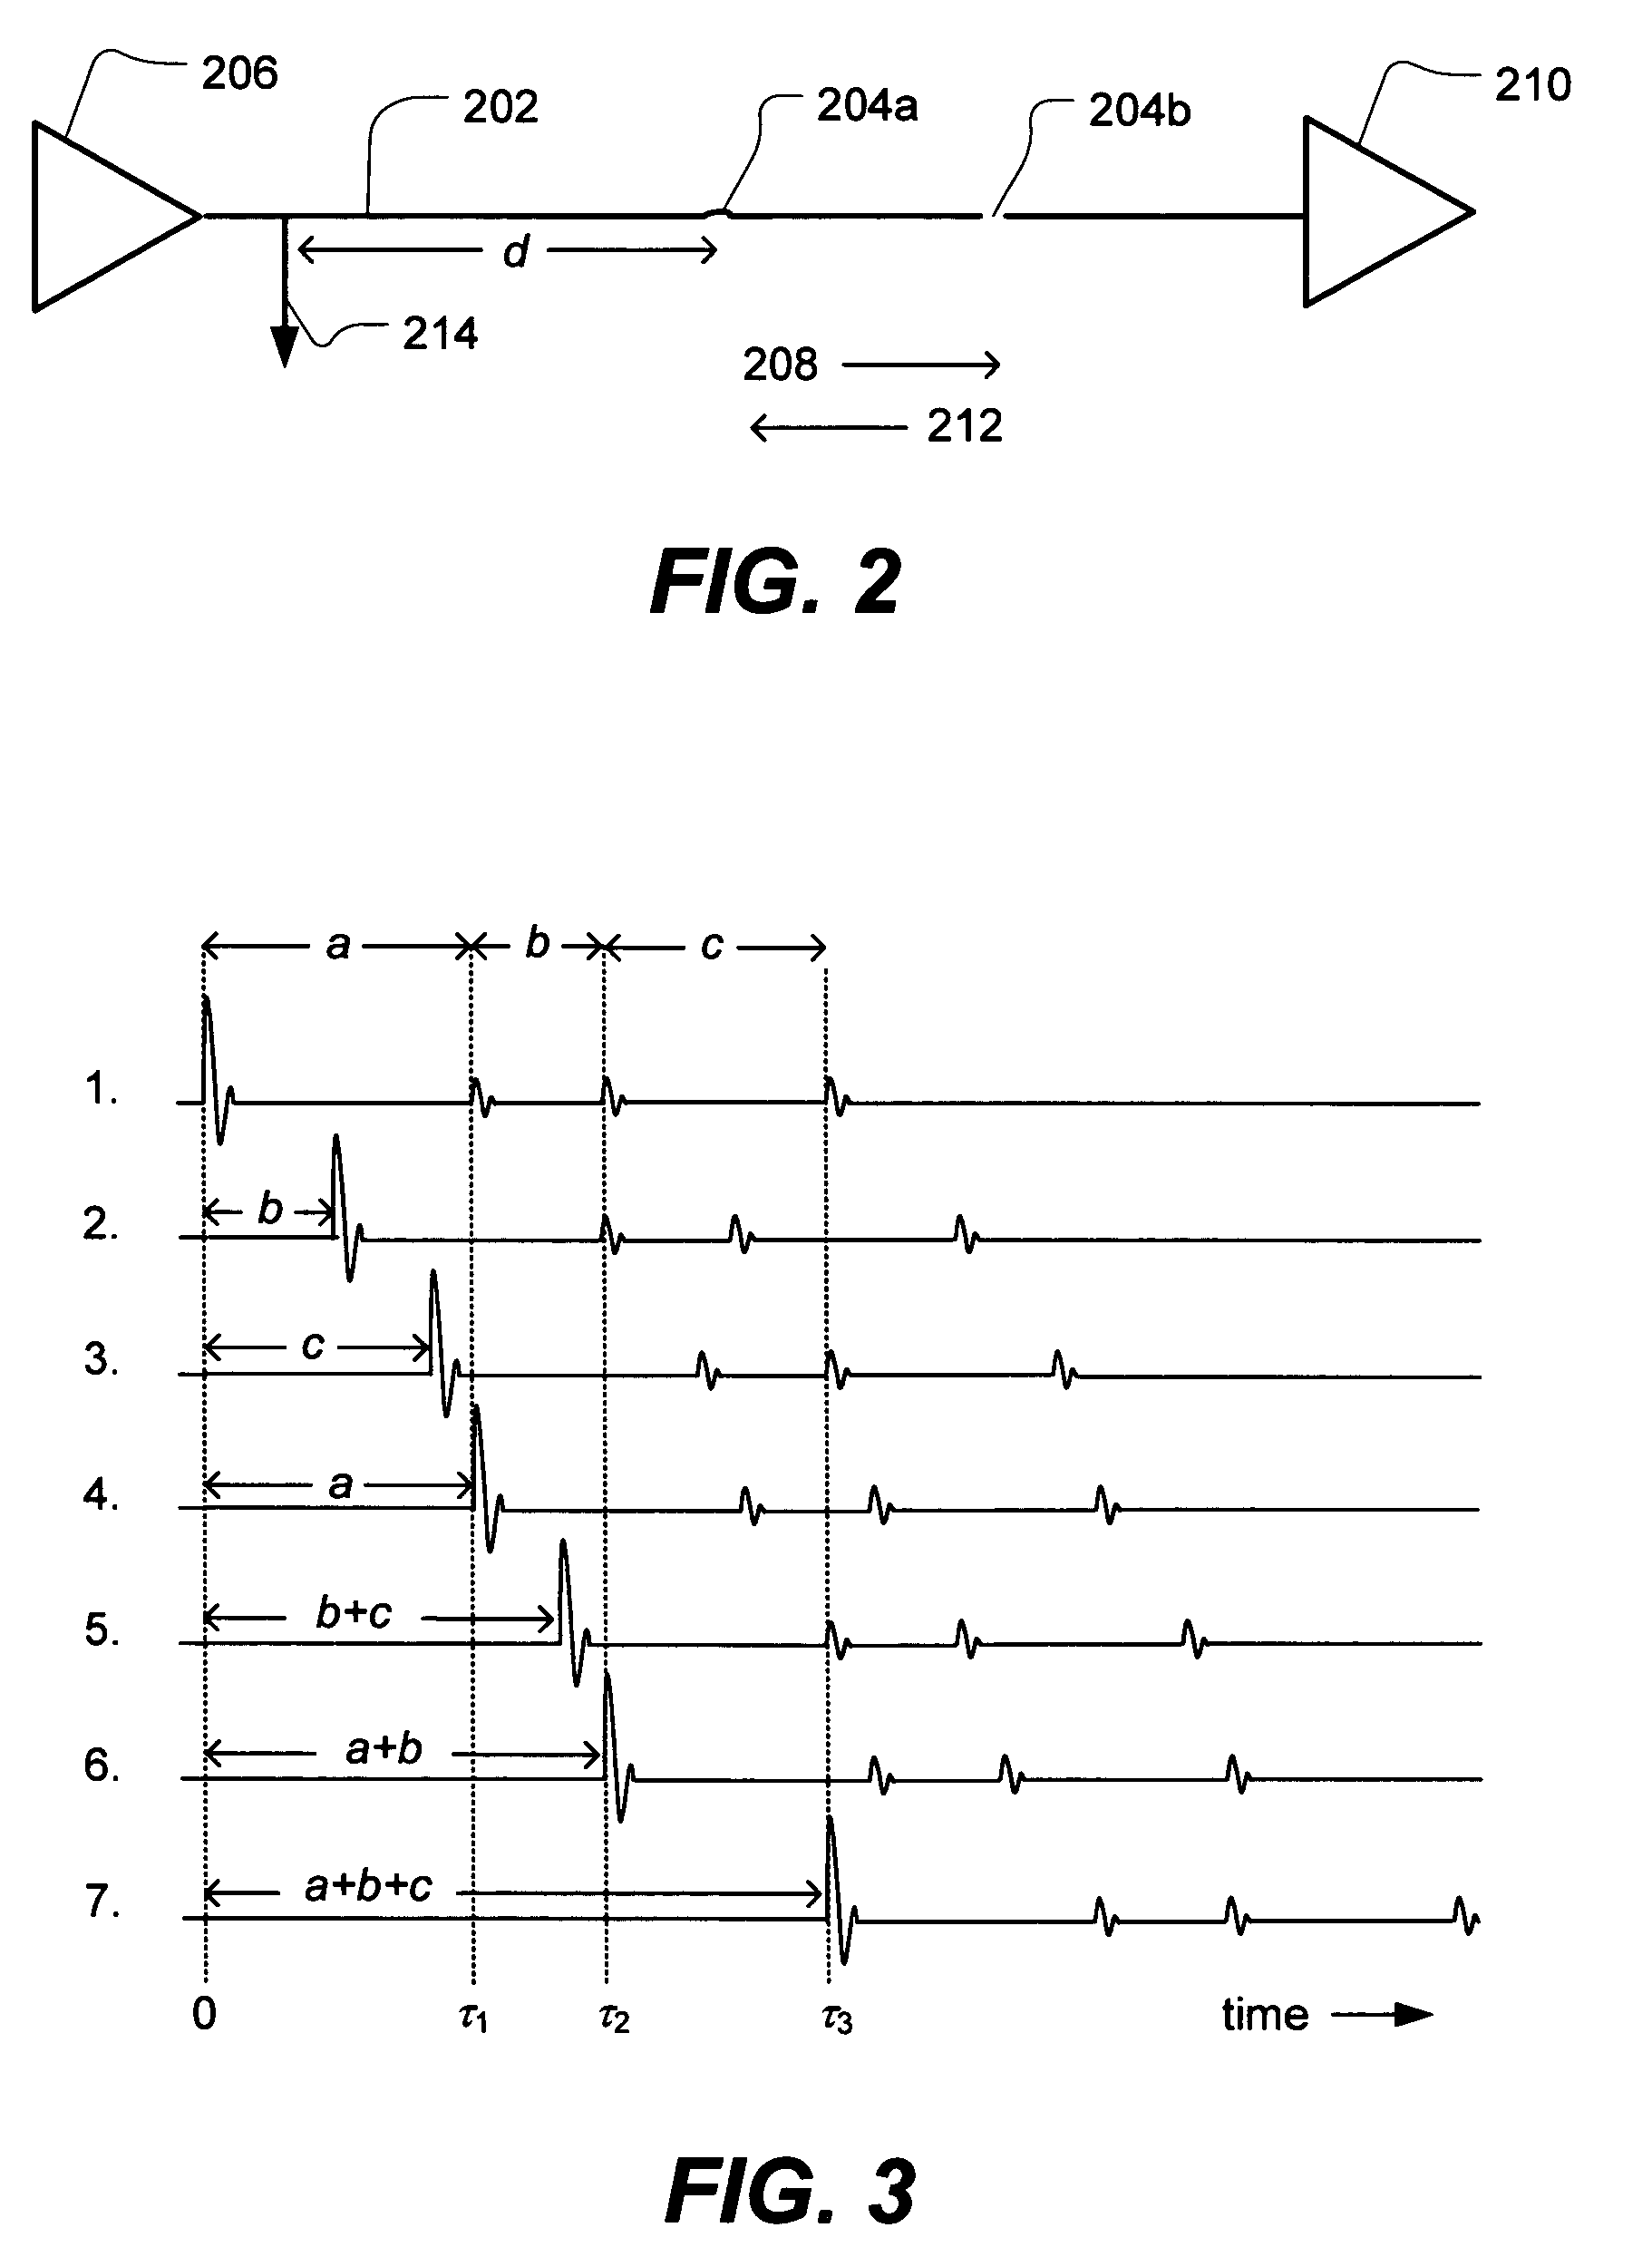 Method and system for testing a signal path having an operational signal